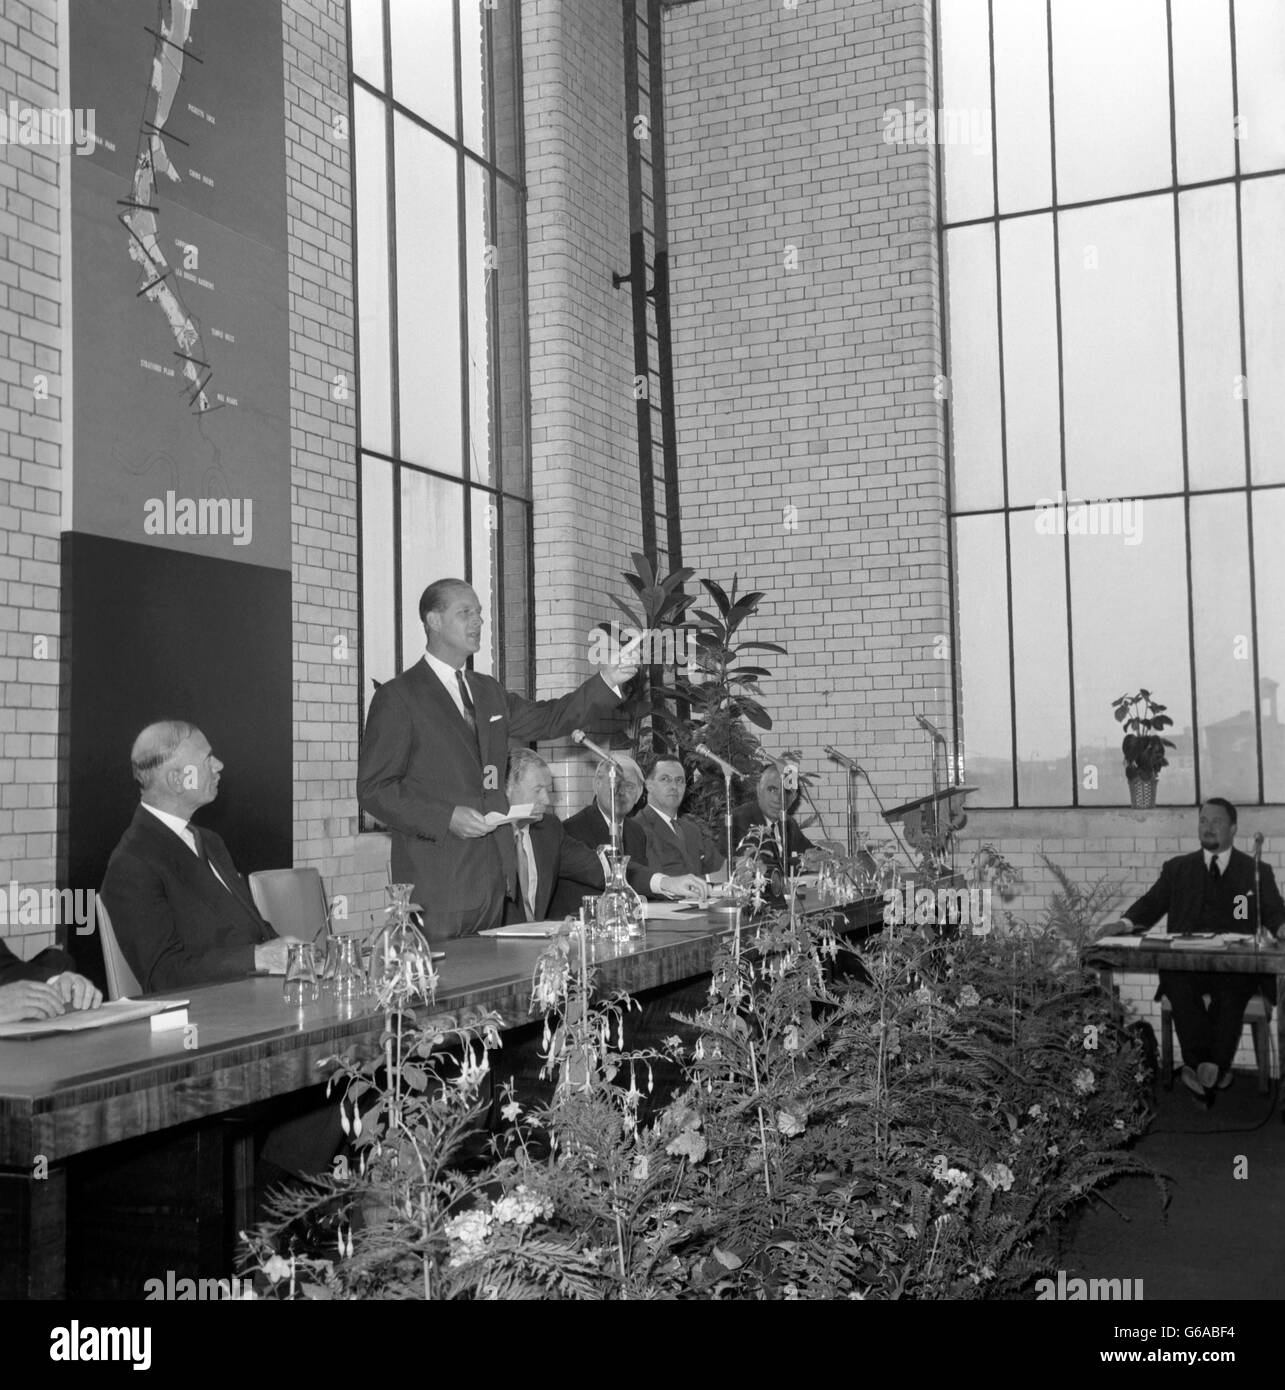 Prince Philip, The Duke of Edinburgh, making the opening speech. The conference deals with a scheme to make 6,000 acres of the Lea Valley into a regional park with recreational facilities. The Duke said the general idea of the scheme made very good sense and he congratulated the Civic Trust on their imaginative and exciting proposals Stock Photo